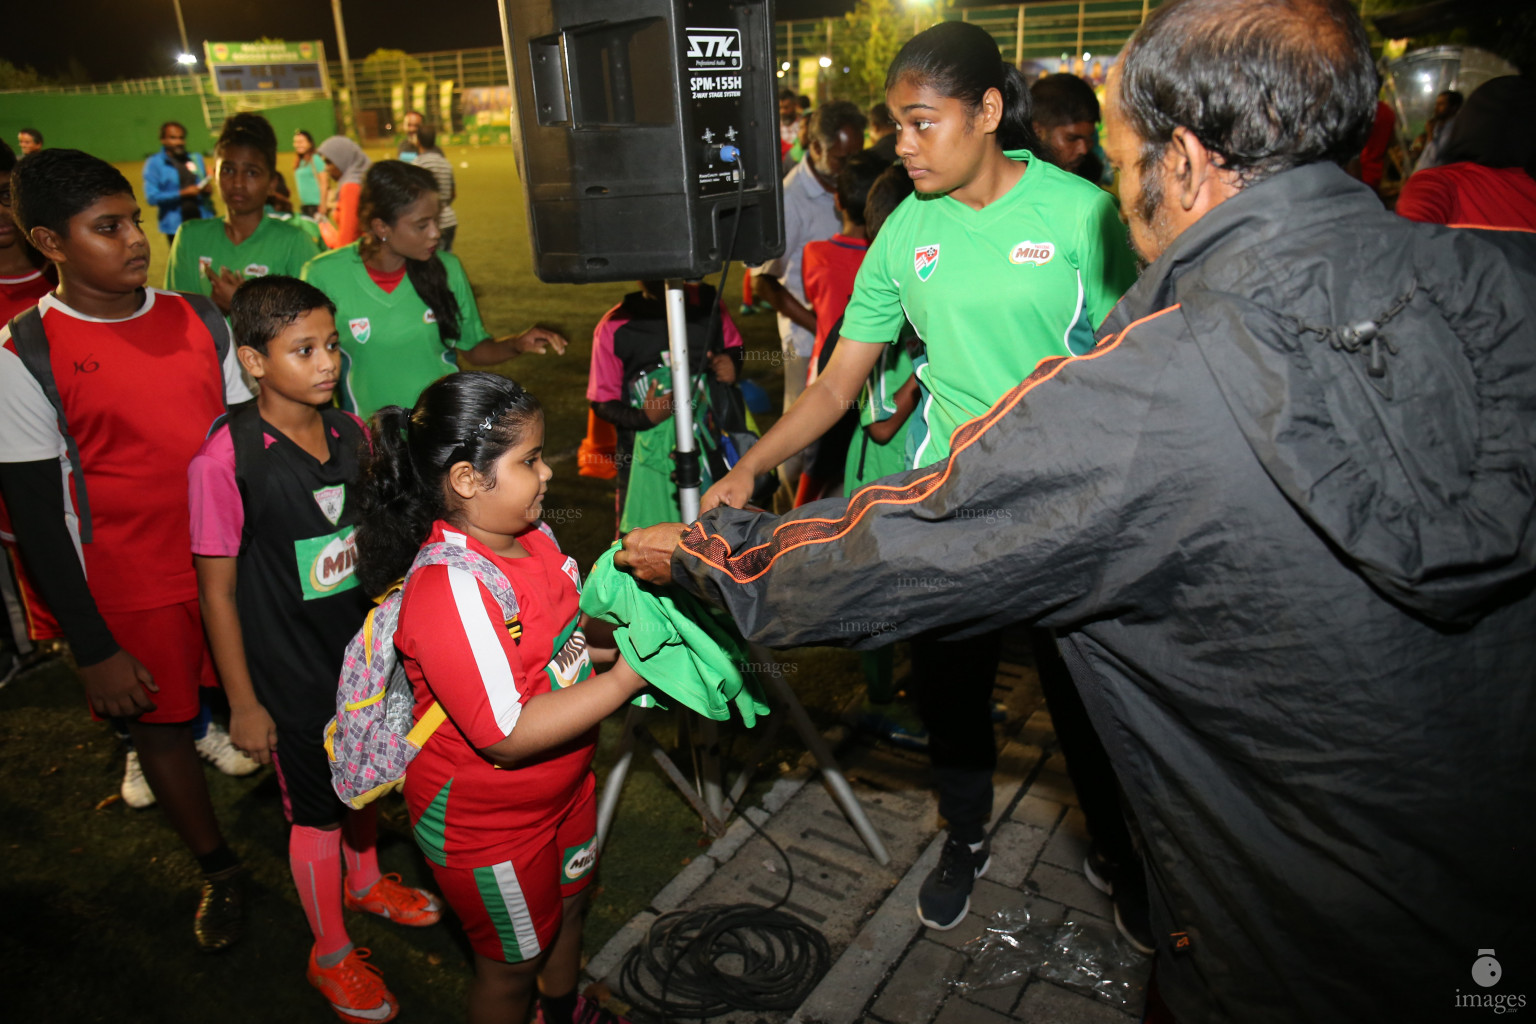 MILO Road To Barcelona (Selection Day 1) 2018 In Male' Maldives, October 9, Tuesday 2018  (Images.mv Photo/ Ismail Thoriq)